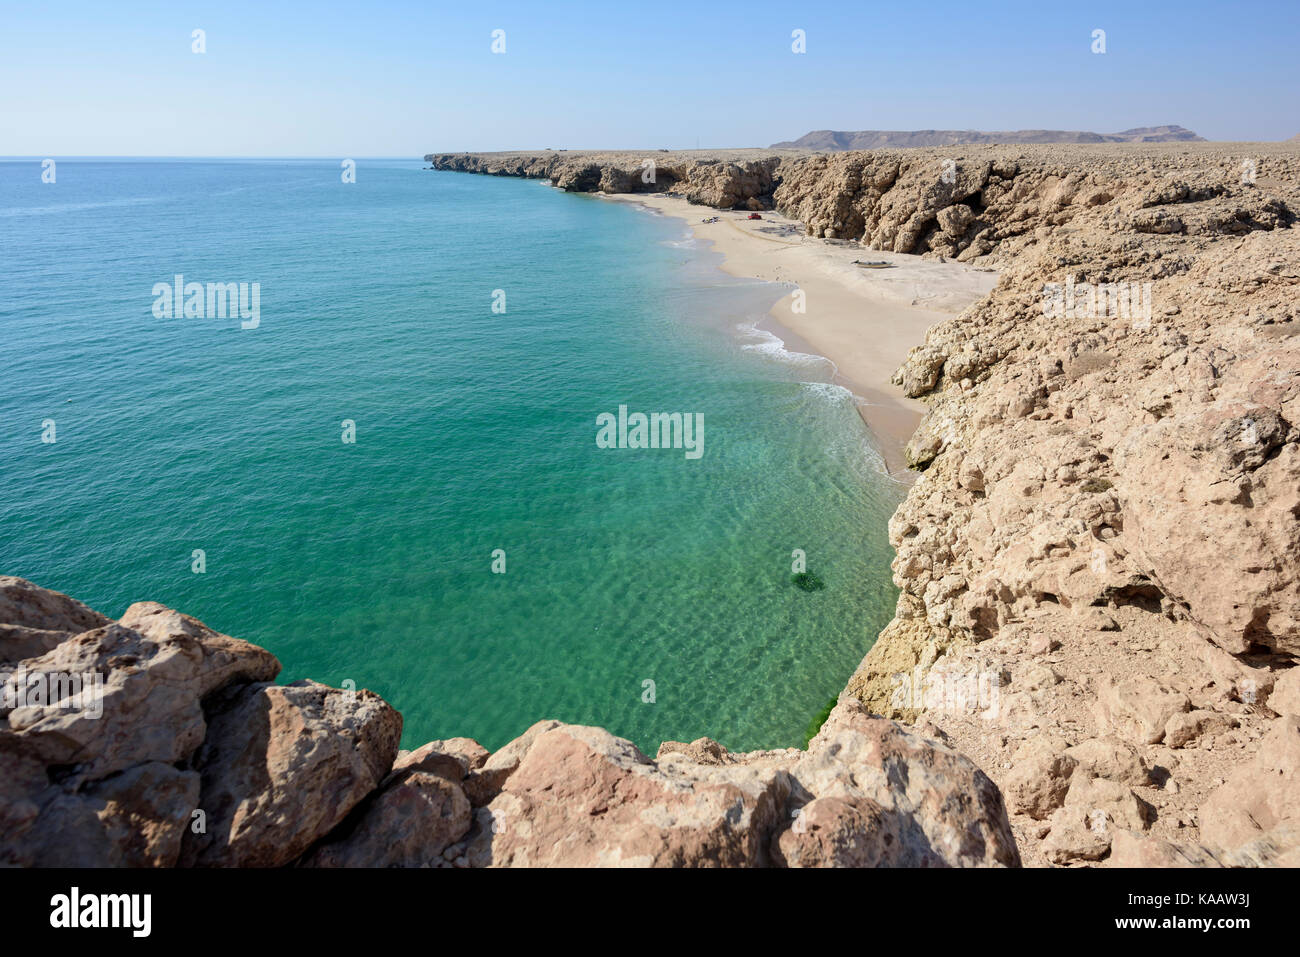 Wild beach at the coast of Ras Al Jinz with calm ocean and blue sky, Sultanate of Oman. Stock Photo